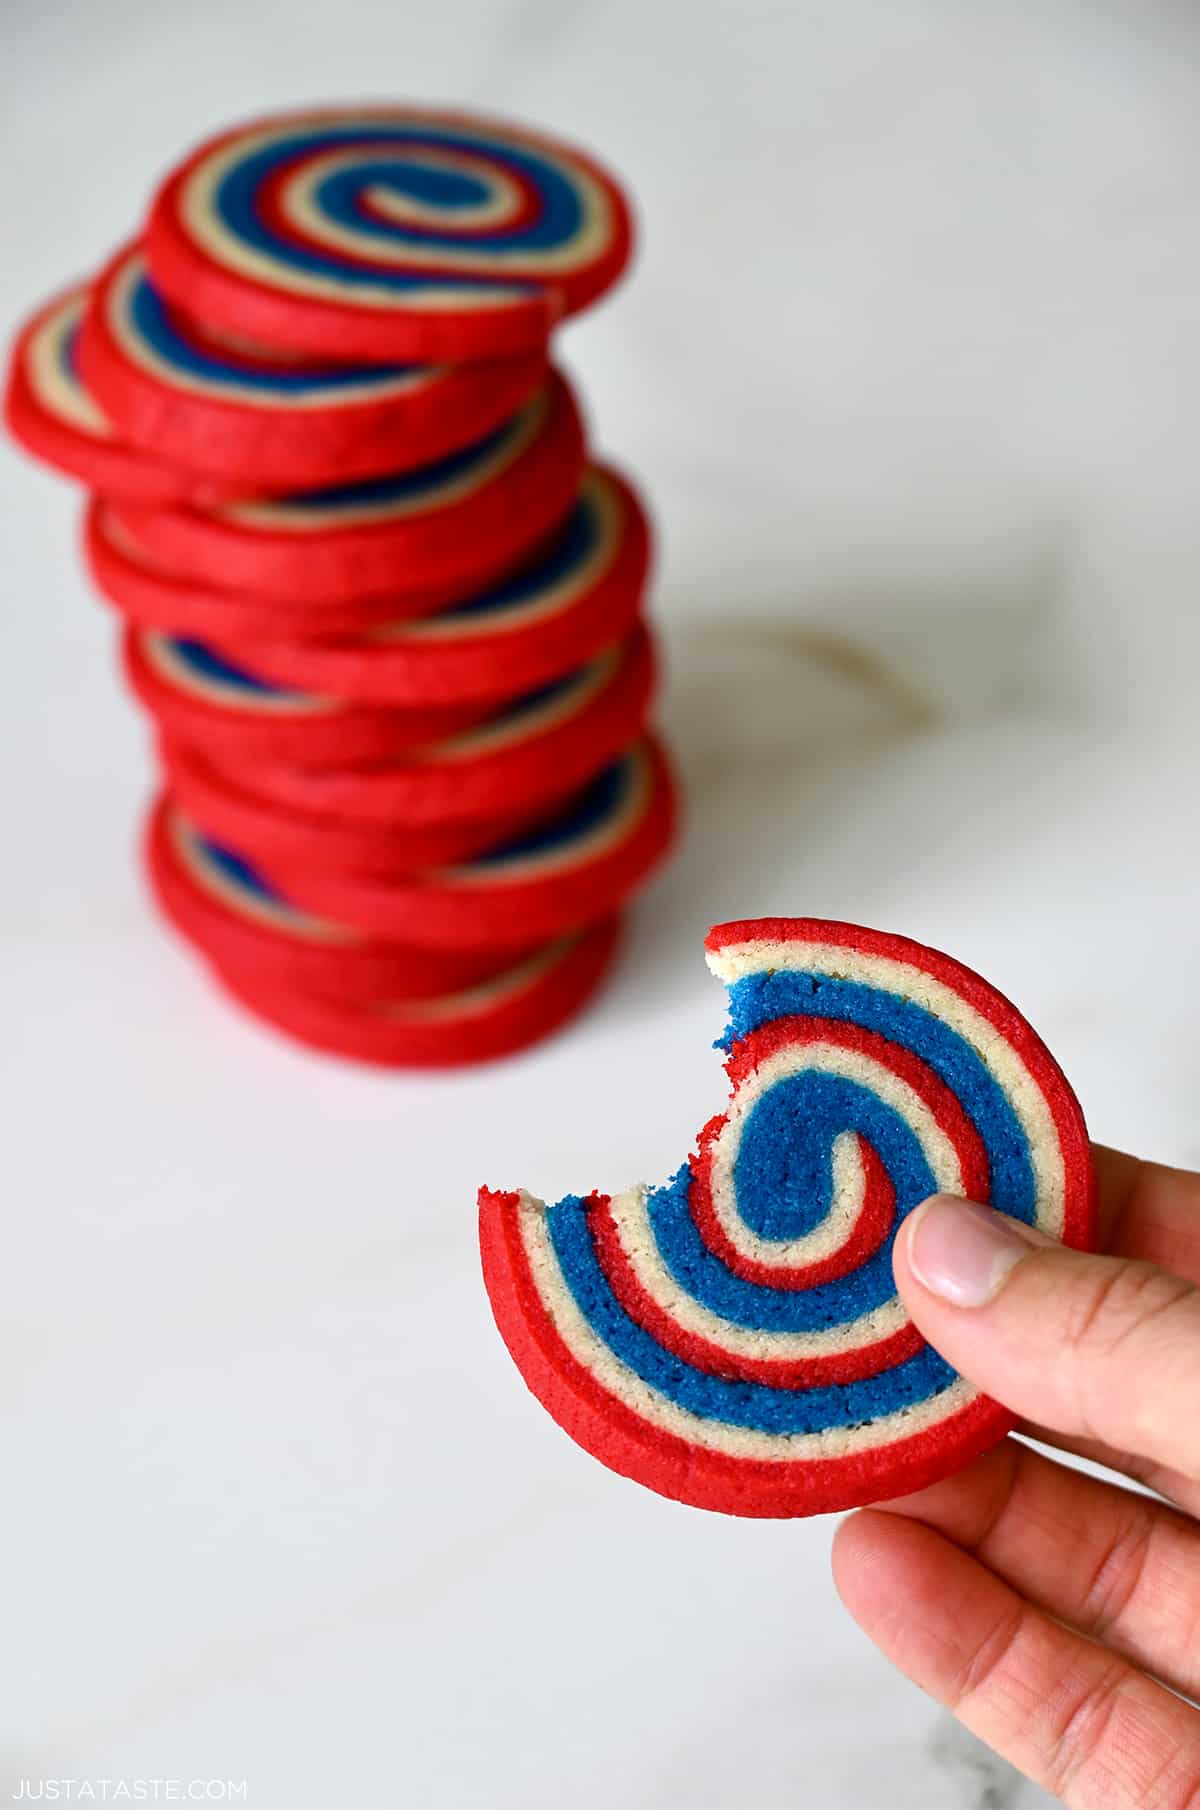 A hand holds a red, white and blue pinwheel cookie with a bite taken out of it in front of a tall stack of pinwheel cookies.